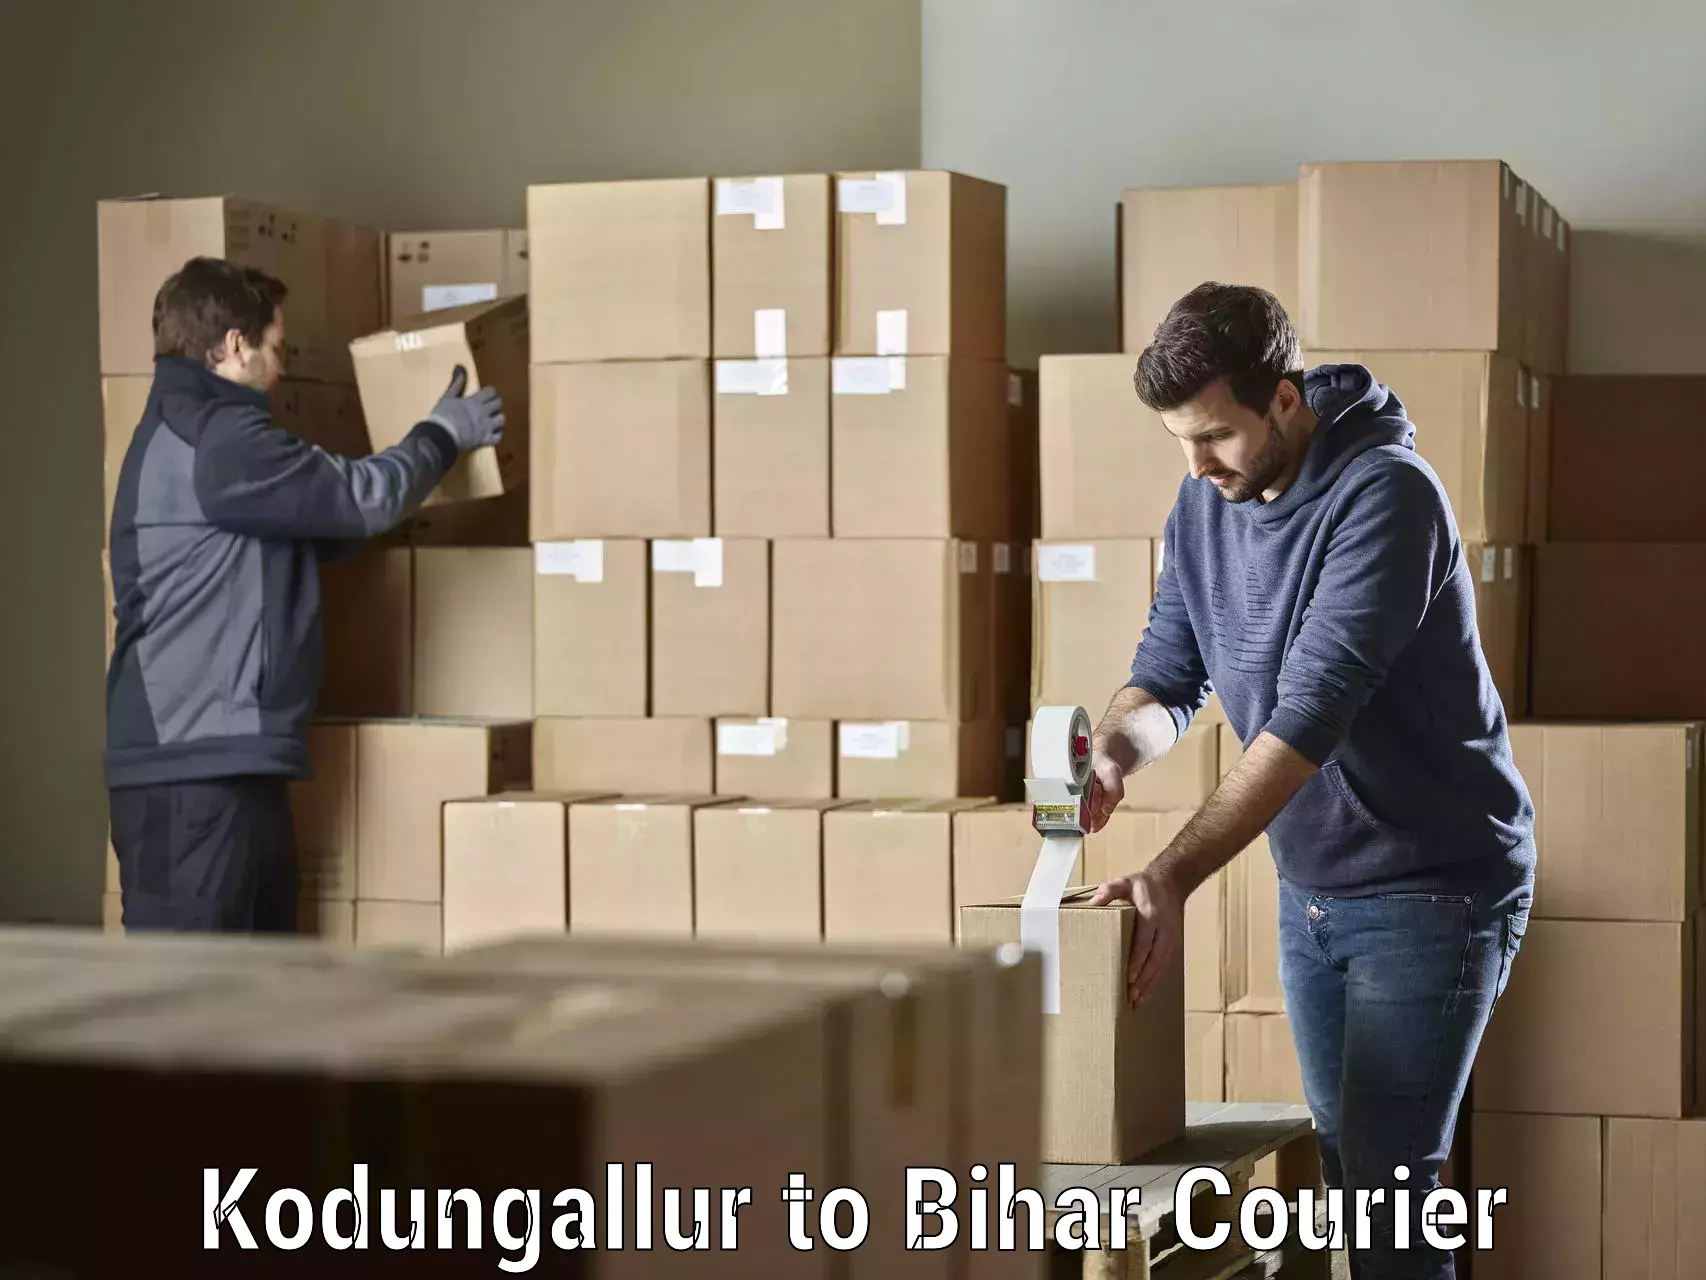 Tech-enabled shipping Kodungallur to Bankipore